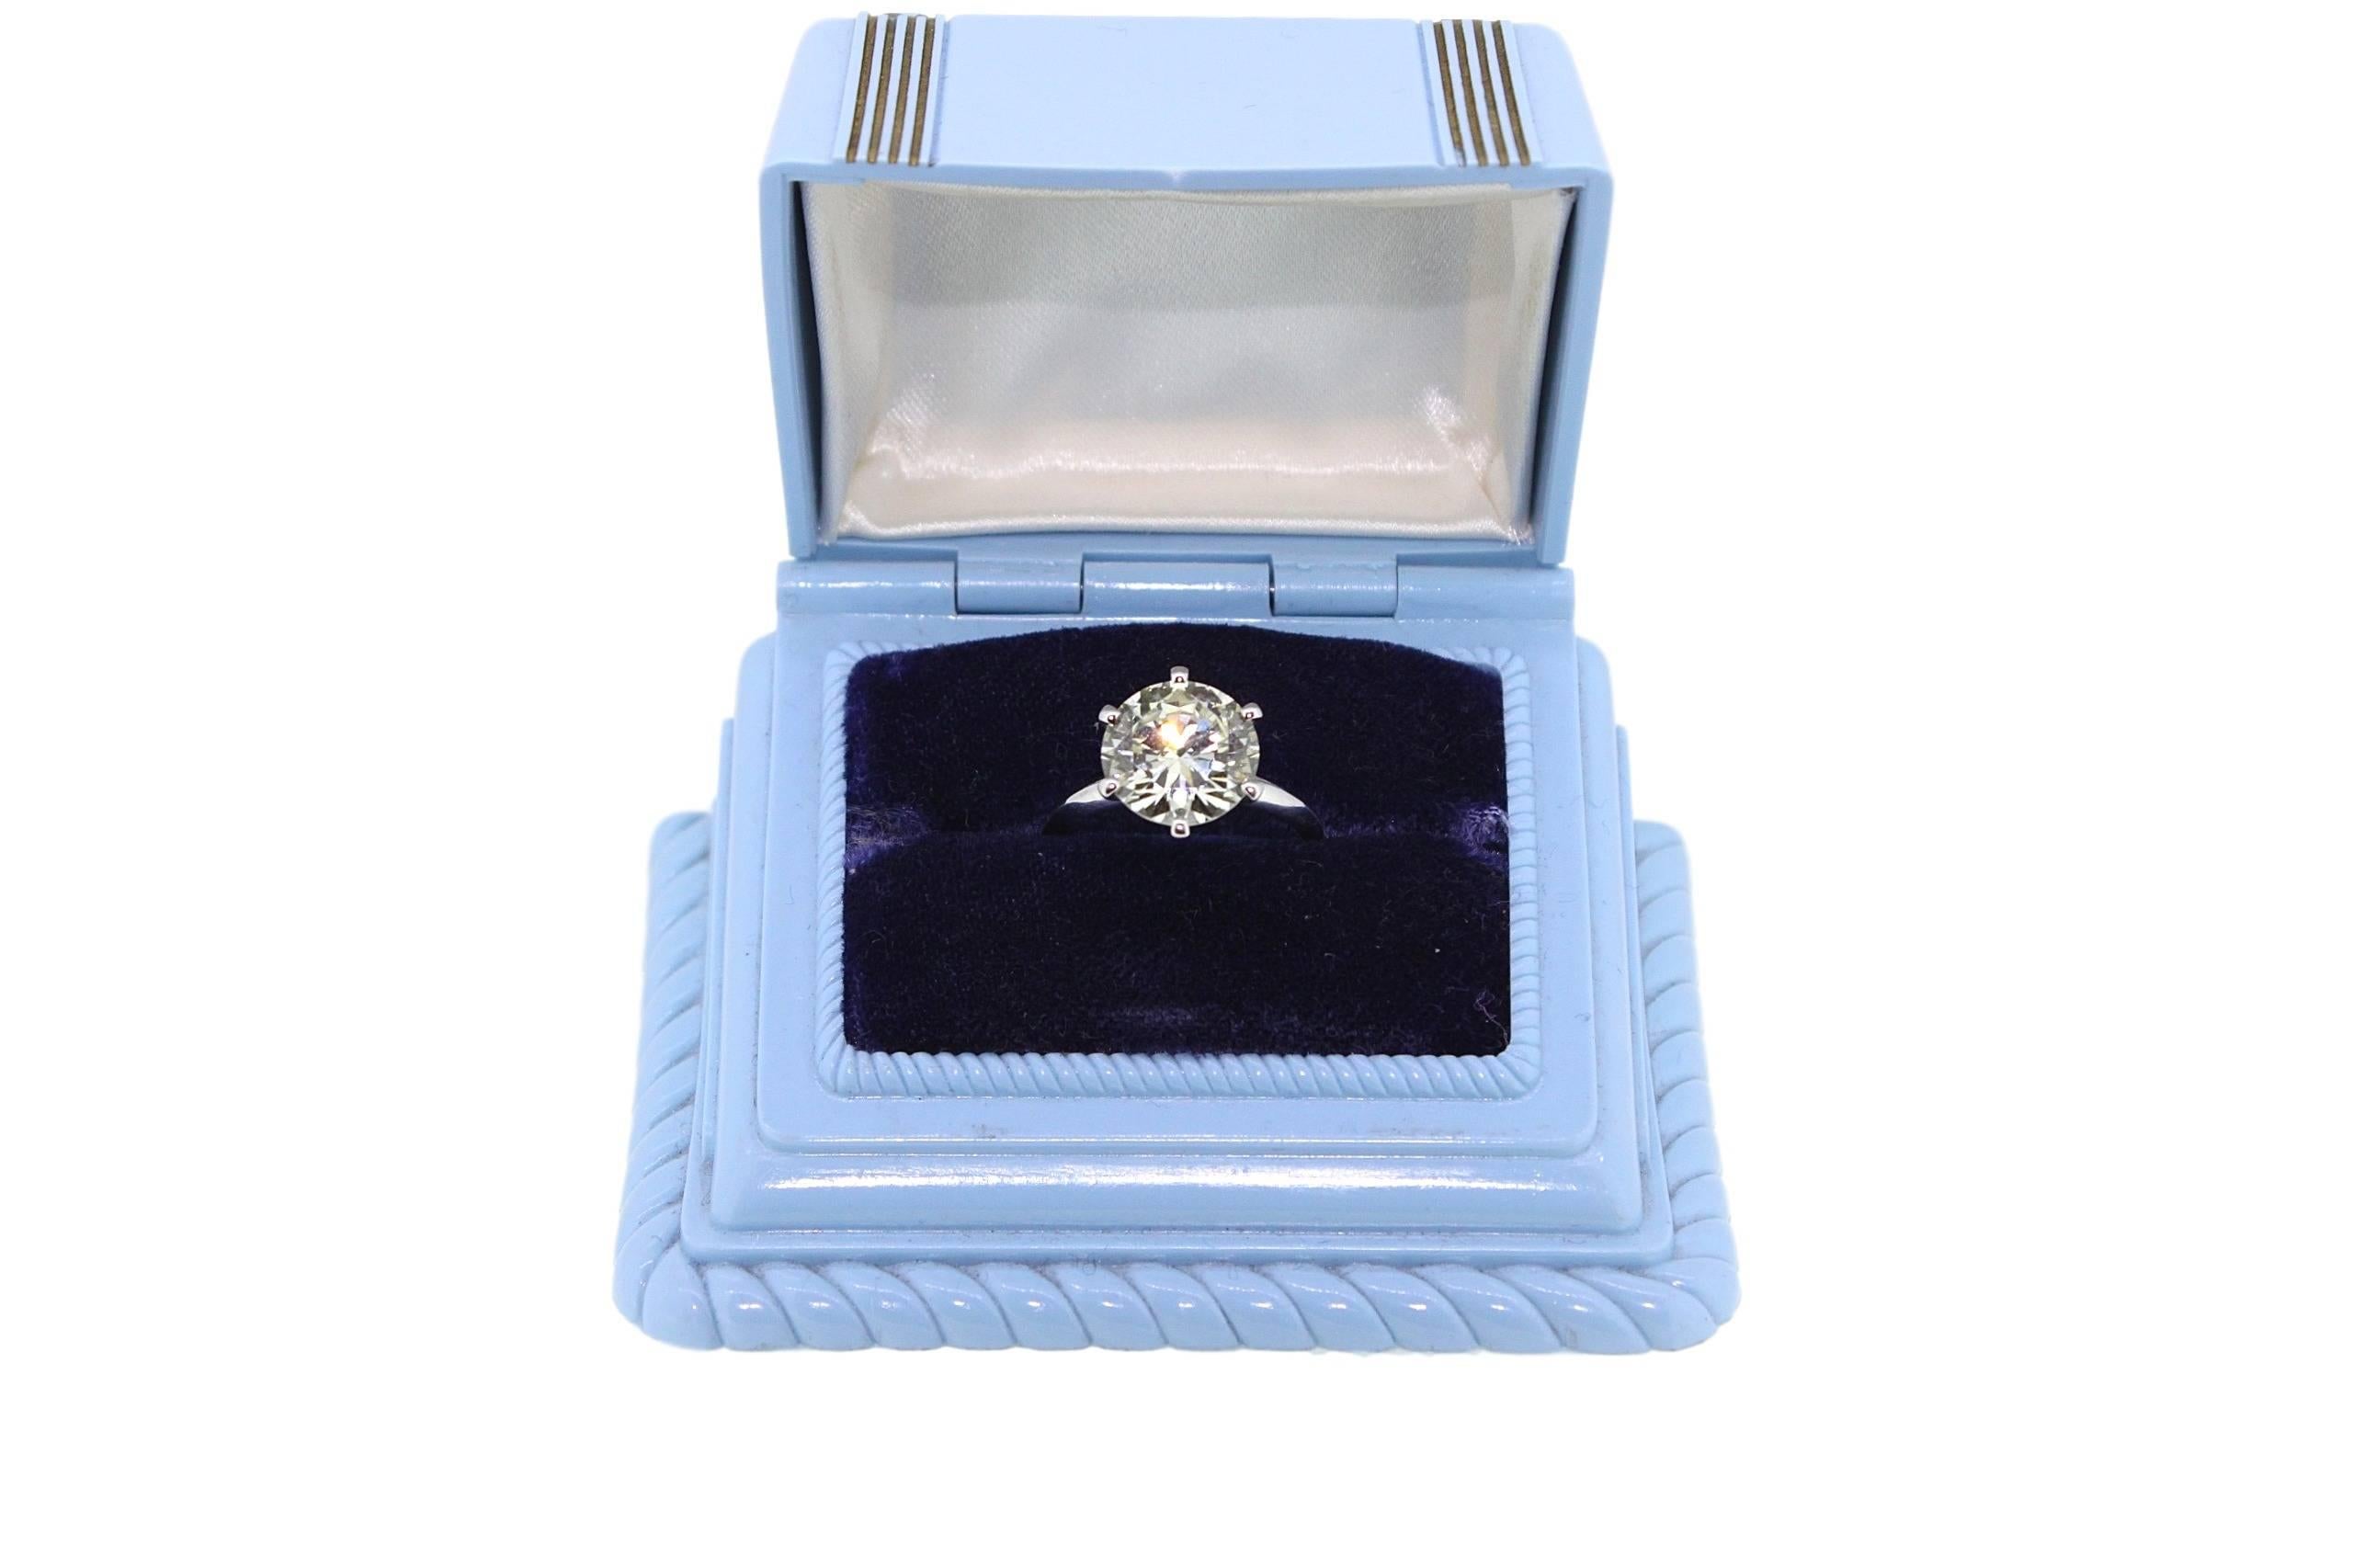 we are offering this beautiful white golden ring.

The setting of the ring is based on the Tiffany design and the 4.57 carat brilliant cut diamond shines and sparkles like no other.
The color is a bit yellow color J,VVS, combined with the white